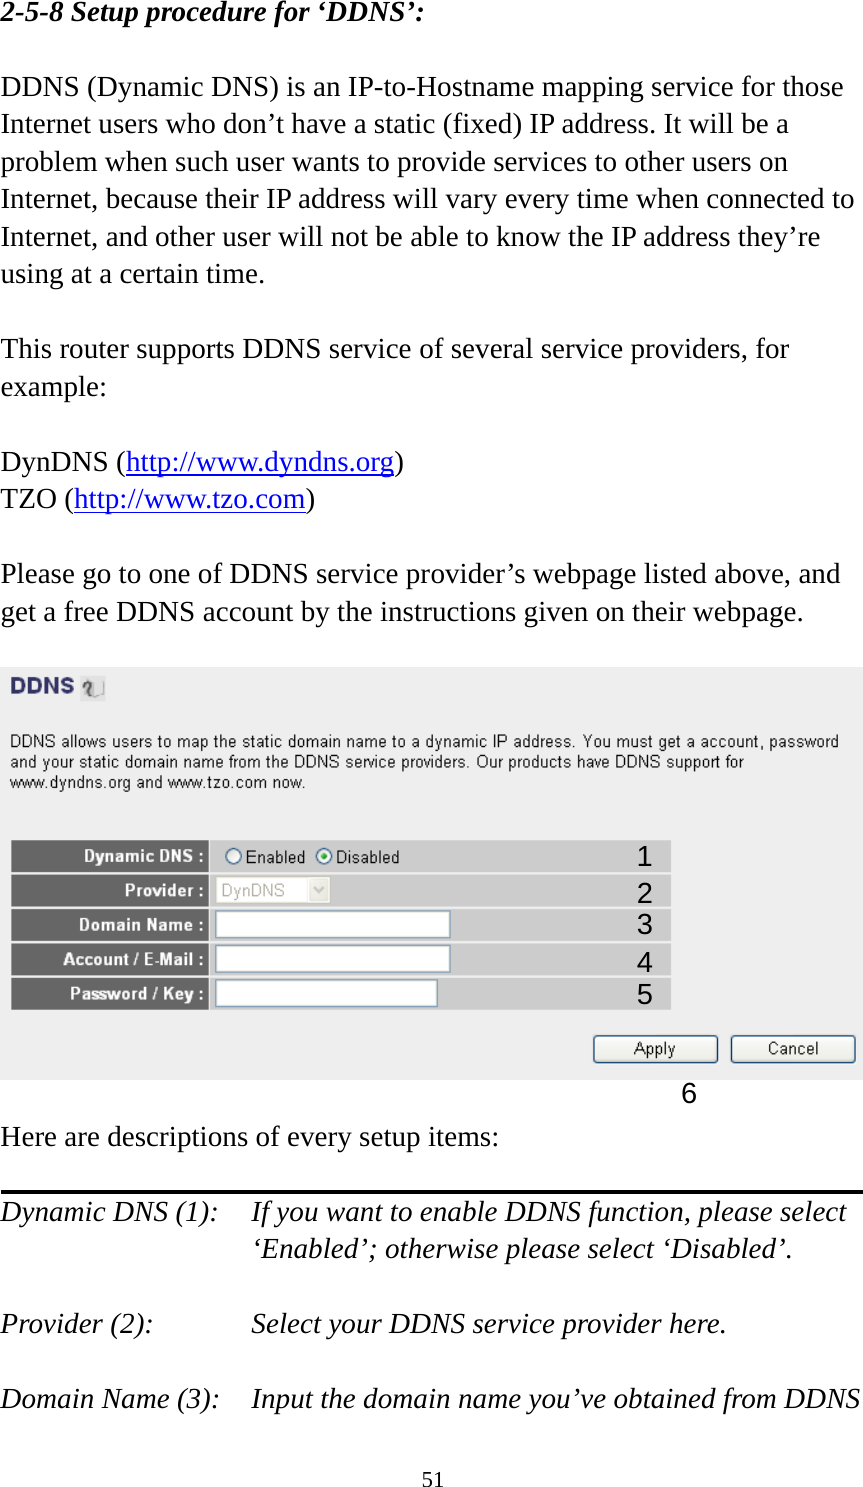 51 2-5-8 Setup procedure for ‘DDNS’:  DDNS (Dynamic DNS) is an IP-to-Hostname mapping service for those Internet users who don’t have a static (fixed) IP address. It will be a problem when such user wants to provide services to other users on Internet, because their IP address will vary every time when connected to Internet, and other user will not be able to know the IP address they’re using at a certain time.  This router supports DDNS service of several service providers, for example:  DynDNS (http://www.dyndns.org) TZO (http://www.tzo.com)  Please go to one of DDNS service provider’s webpage listed above, and get a free DDNS account by the instructions given on their webpage.    Here are descriptions of every setup items:  Dynamic DNS (1):    If you want to enable DDNS function, please select ‘Enabled’; otherwise please select ‘Disabled’.  Provider (2):      Select your DDNS service provider here.  Domain Name (3):    Input the domain name you’ve obtained from DDNS 1 2345 6 